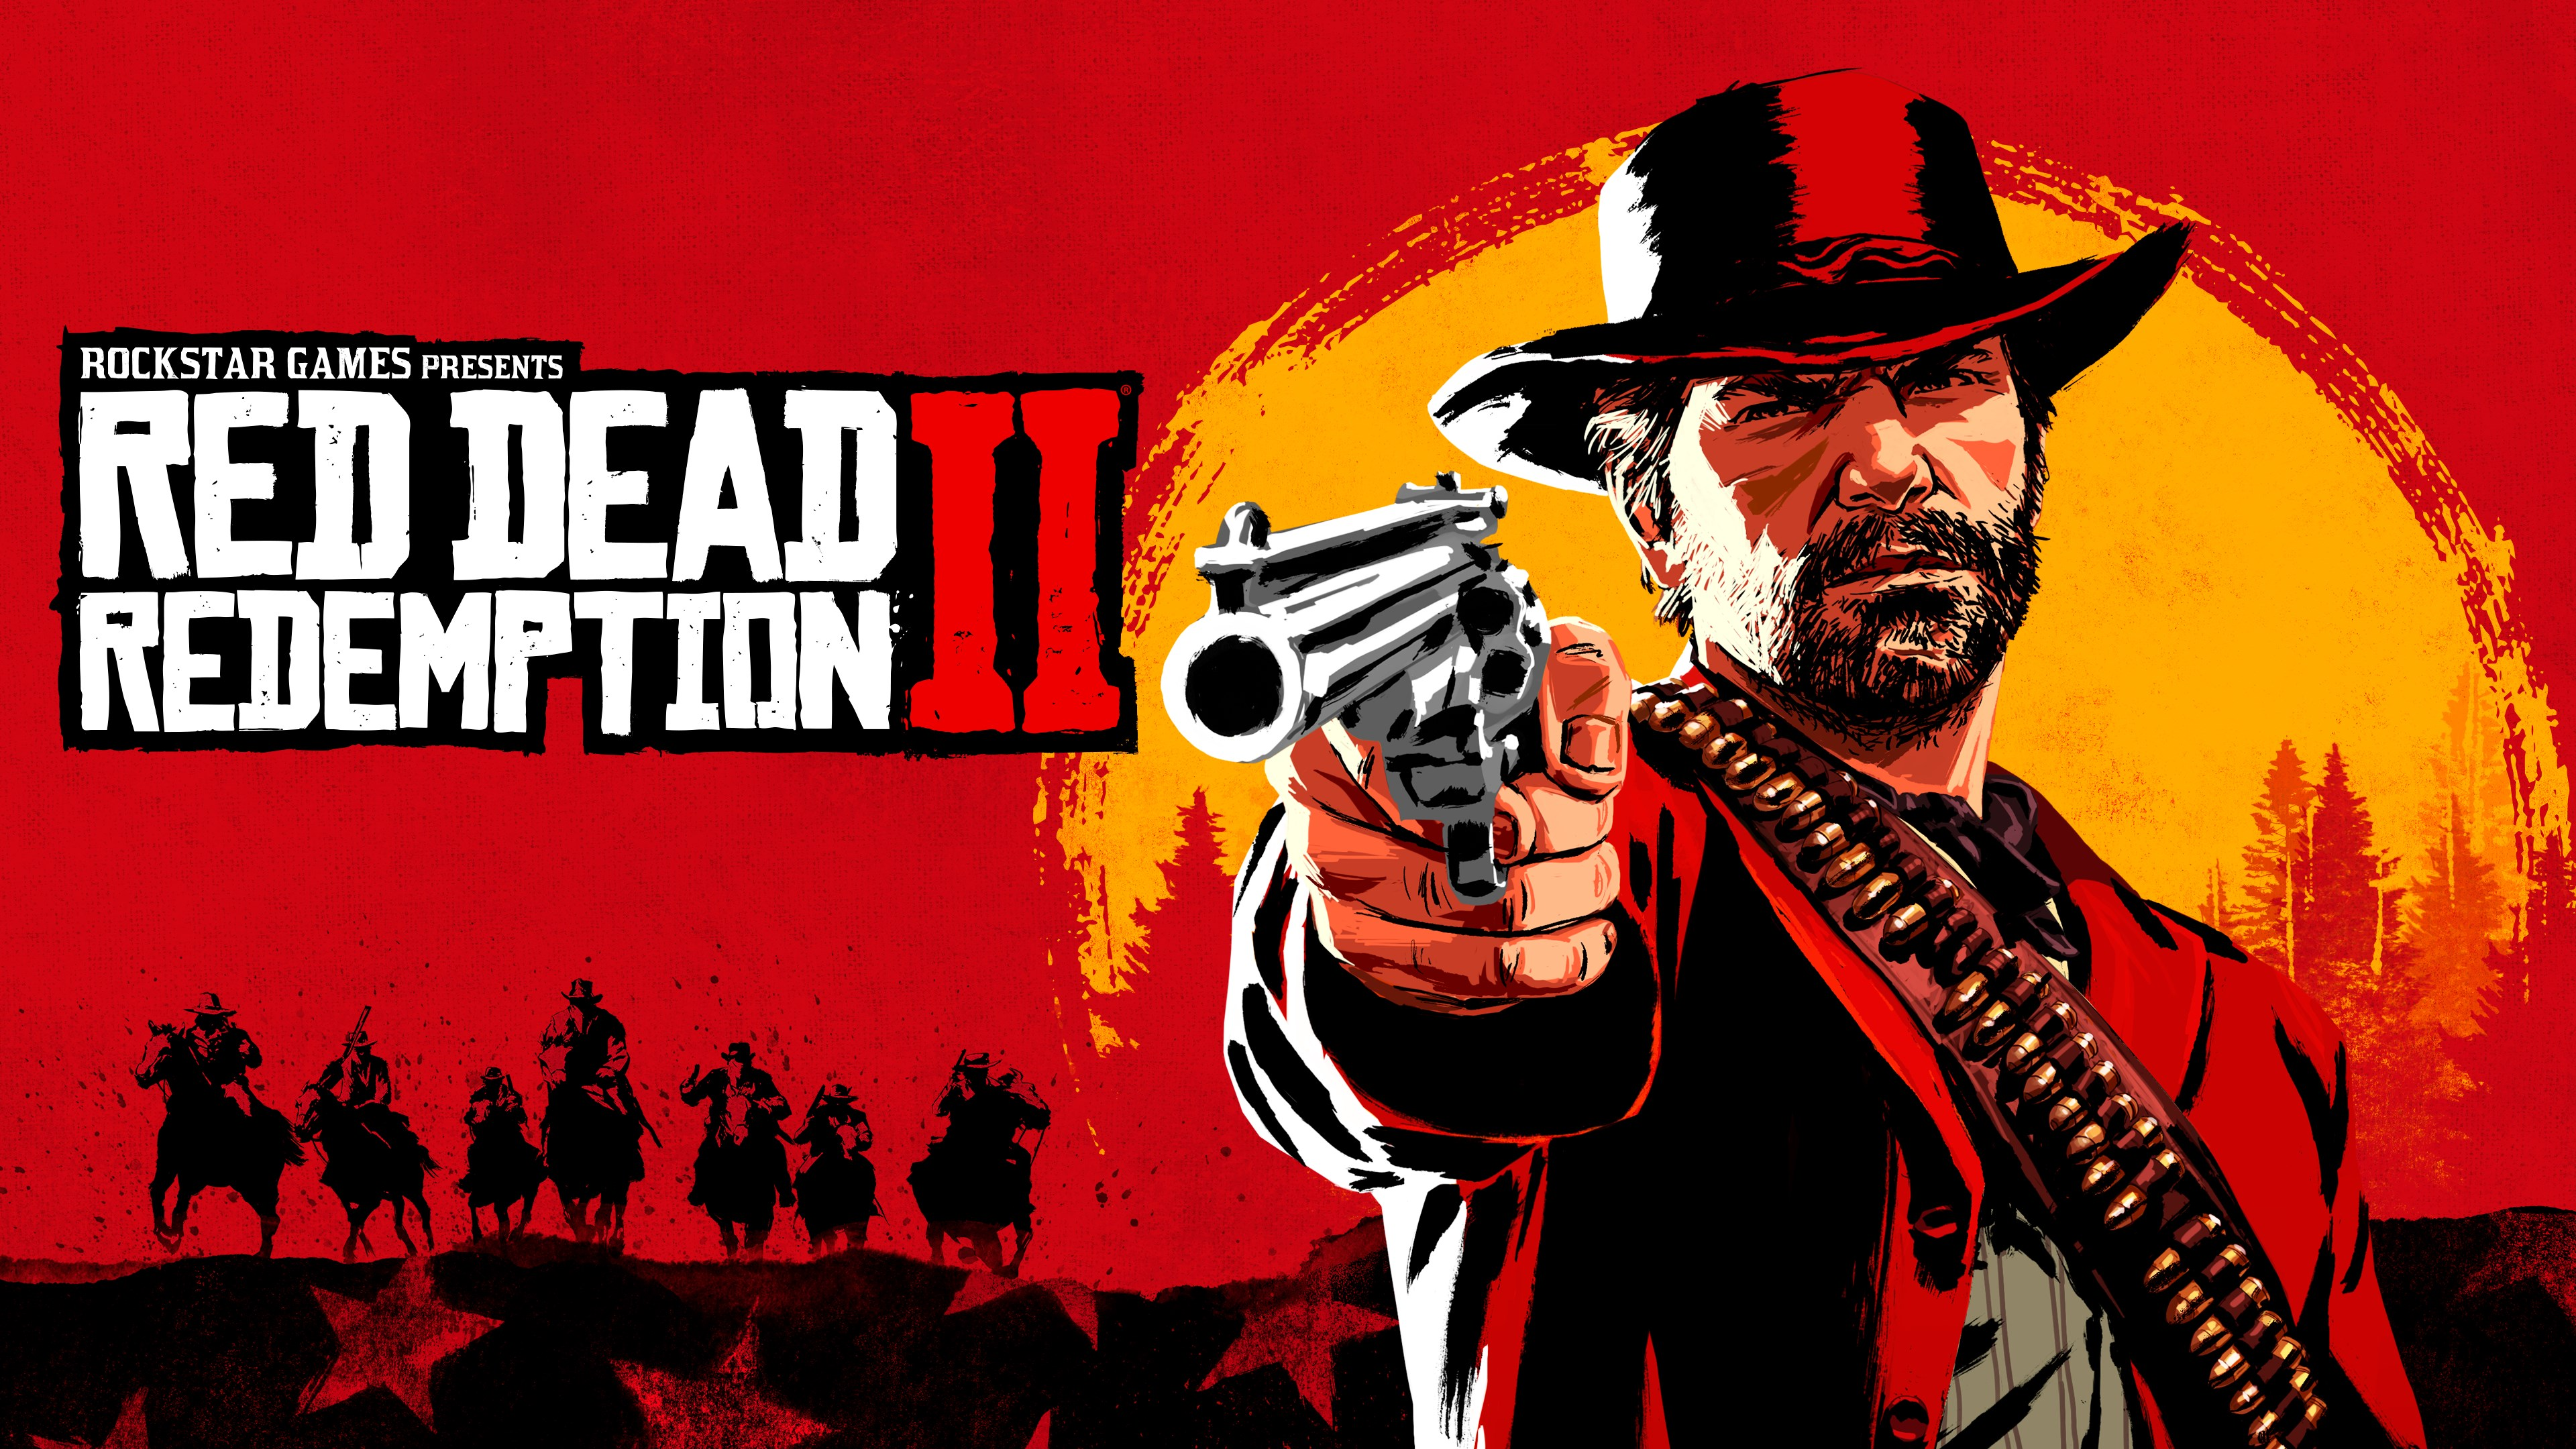 indhente Citere stivhed Red Dead Redemption 2 Achievements - Xbox One - Exophase.com